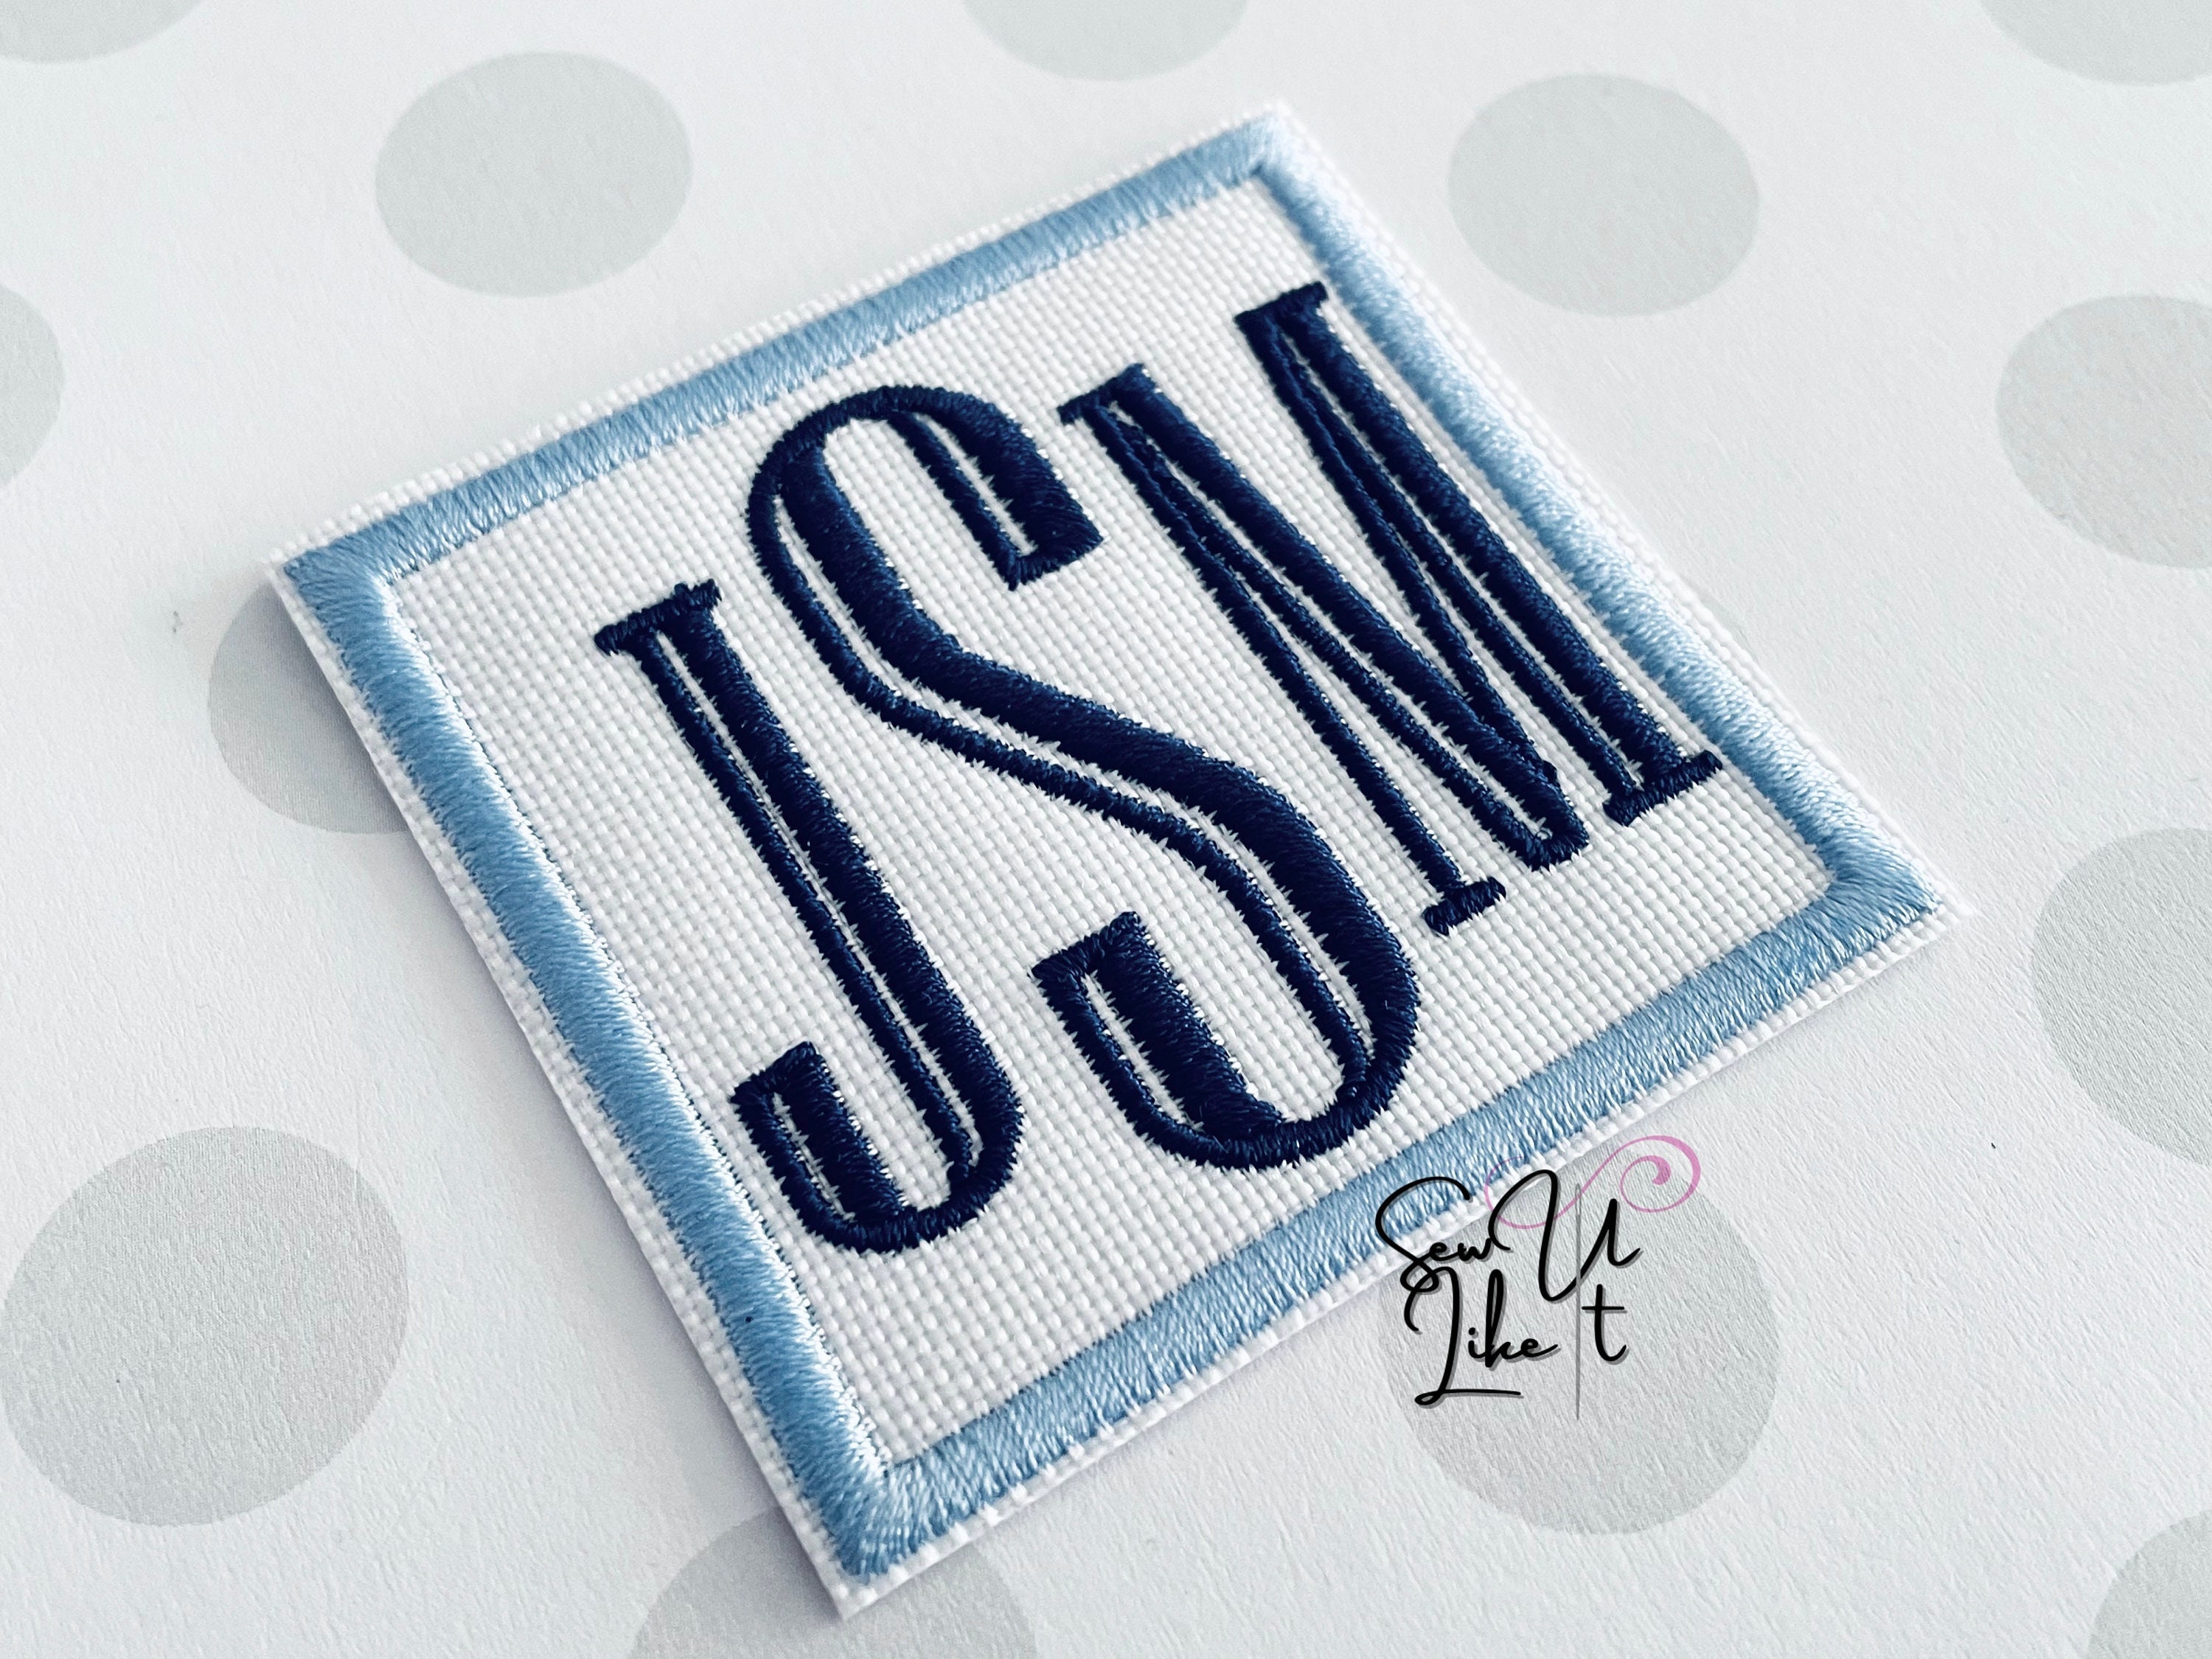 Cute Funny Iron on Patches Happiness, Love, Friendship, Friends, Embroidered  Sew on / Iron on Jeans Bags Clothes Transfer, Badge 